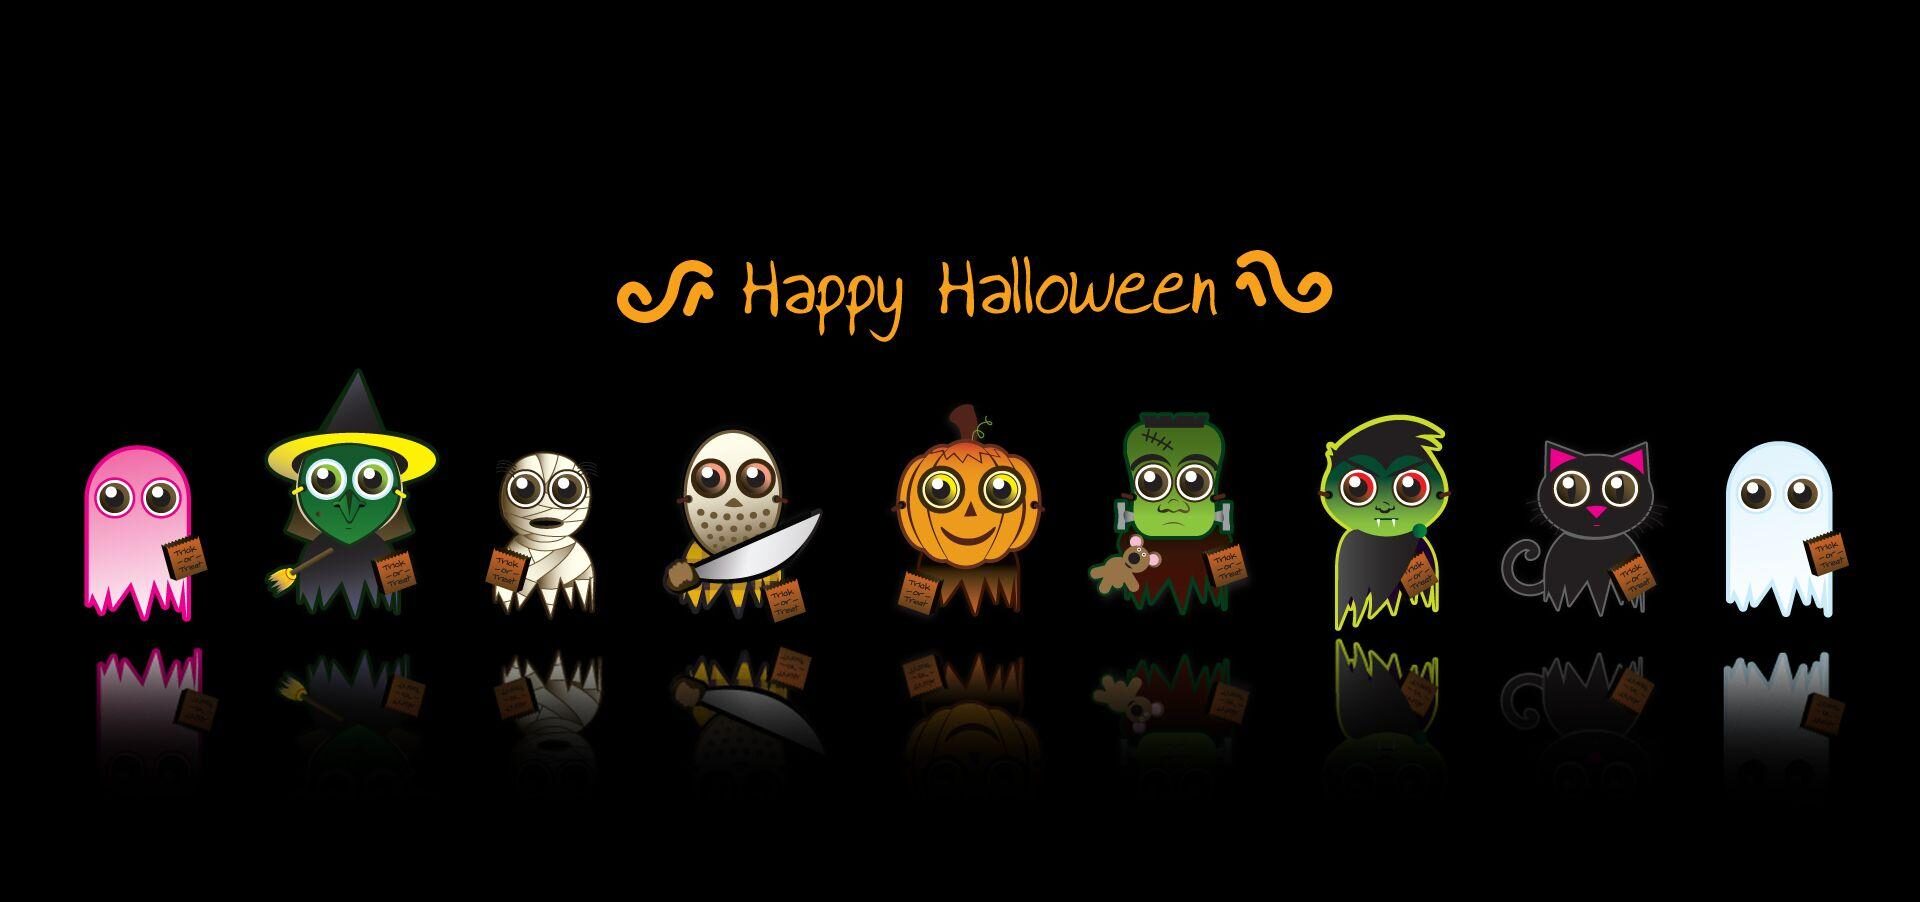 wp2243238 halloween costumes wallpapers e1643964223551